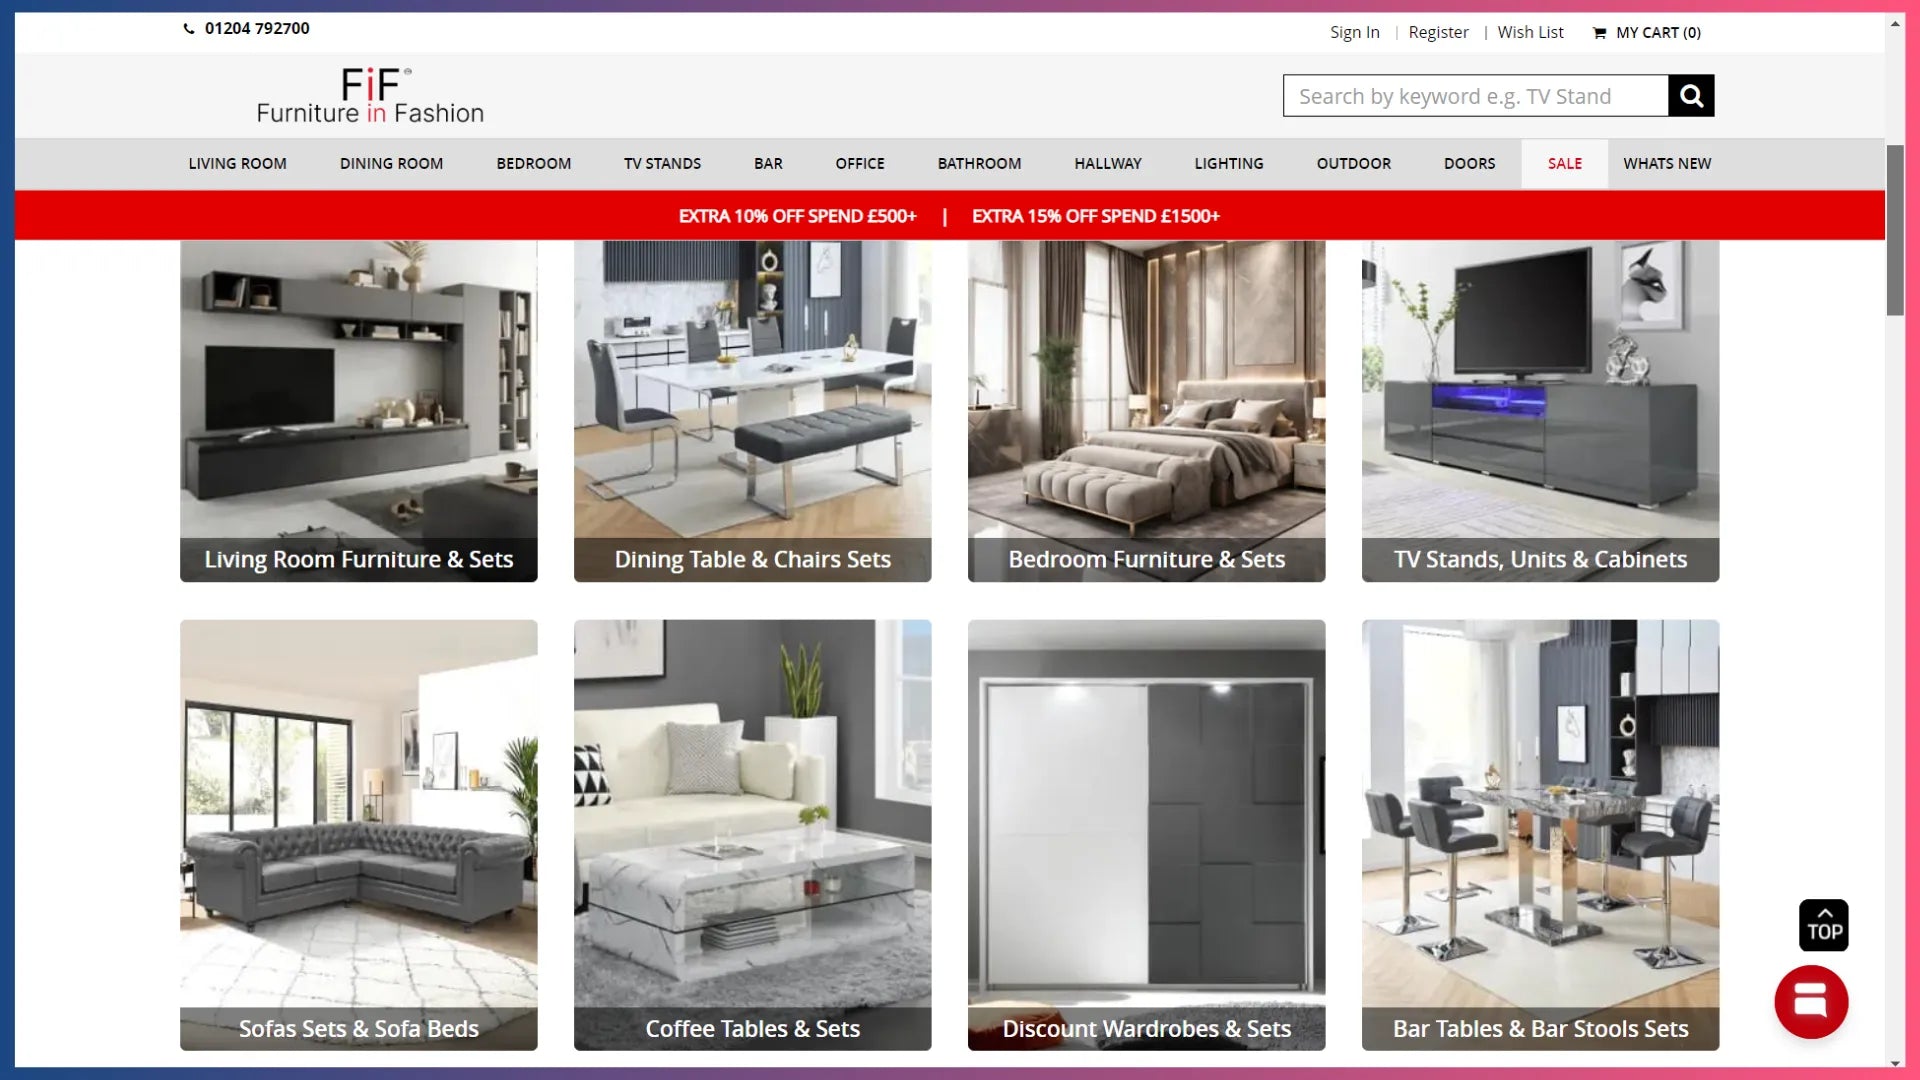 Homepage of Furniture in Fashion